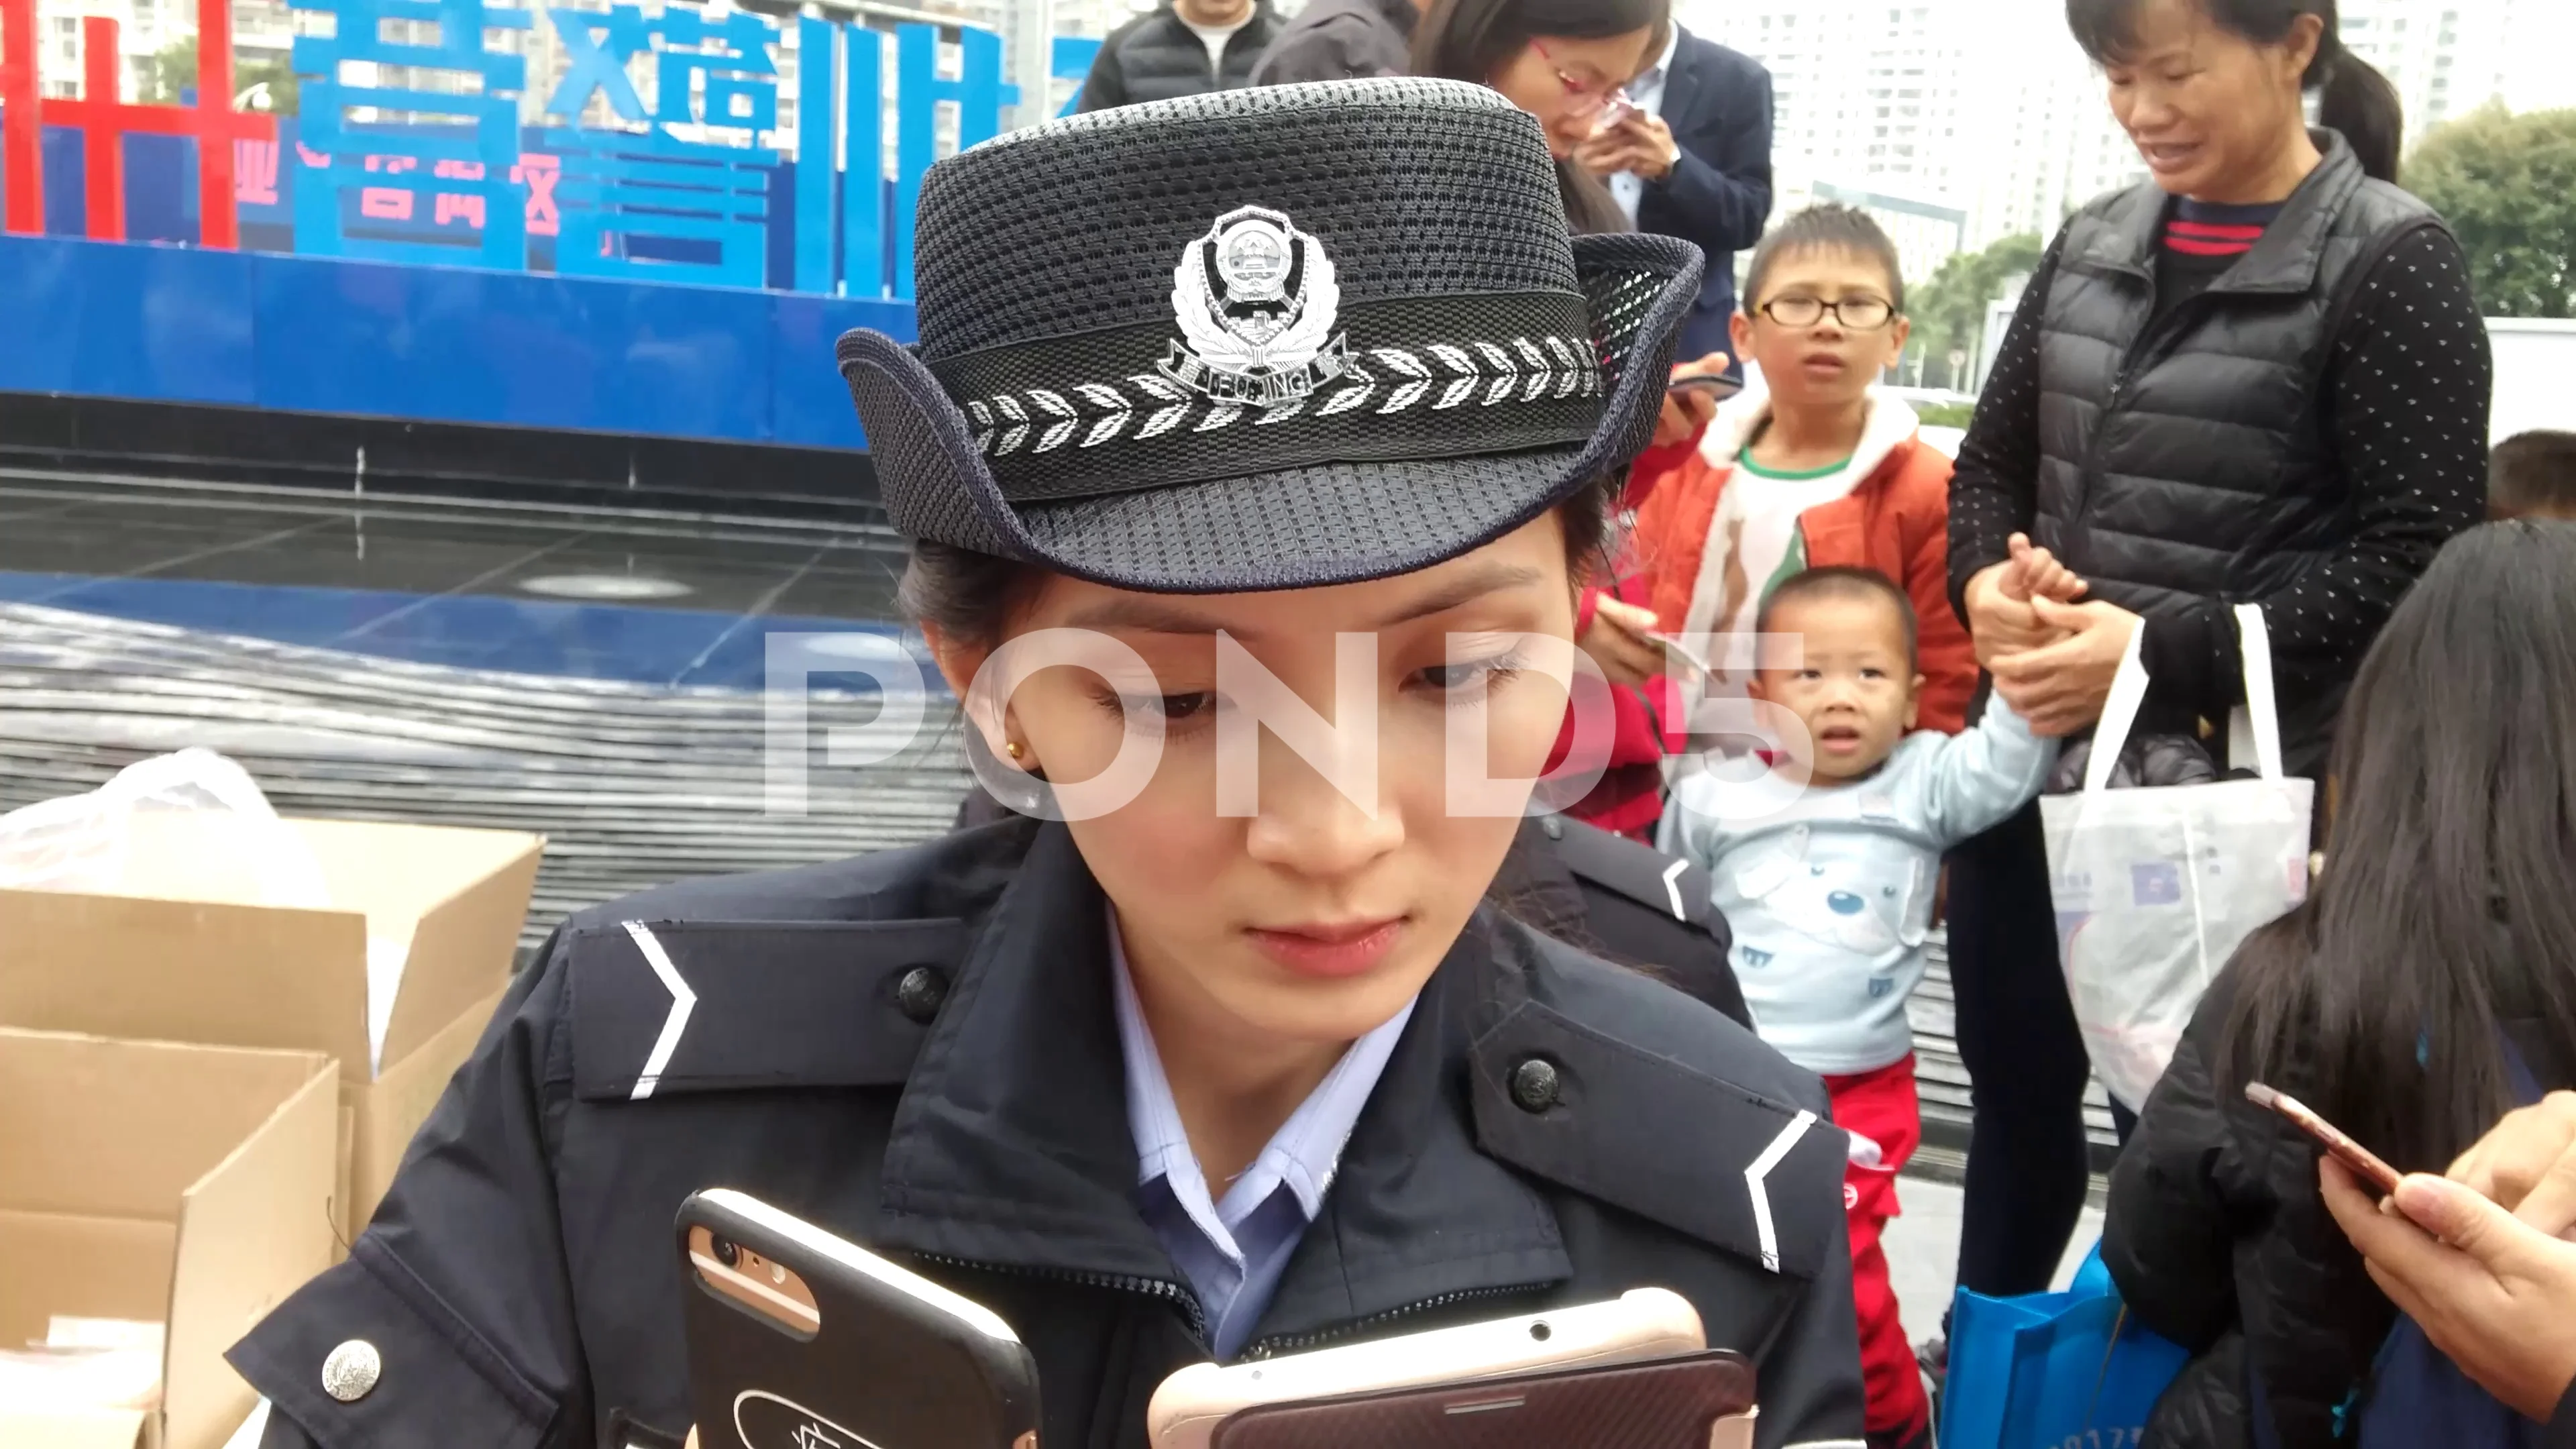 chinese female police